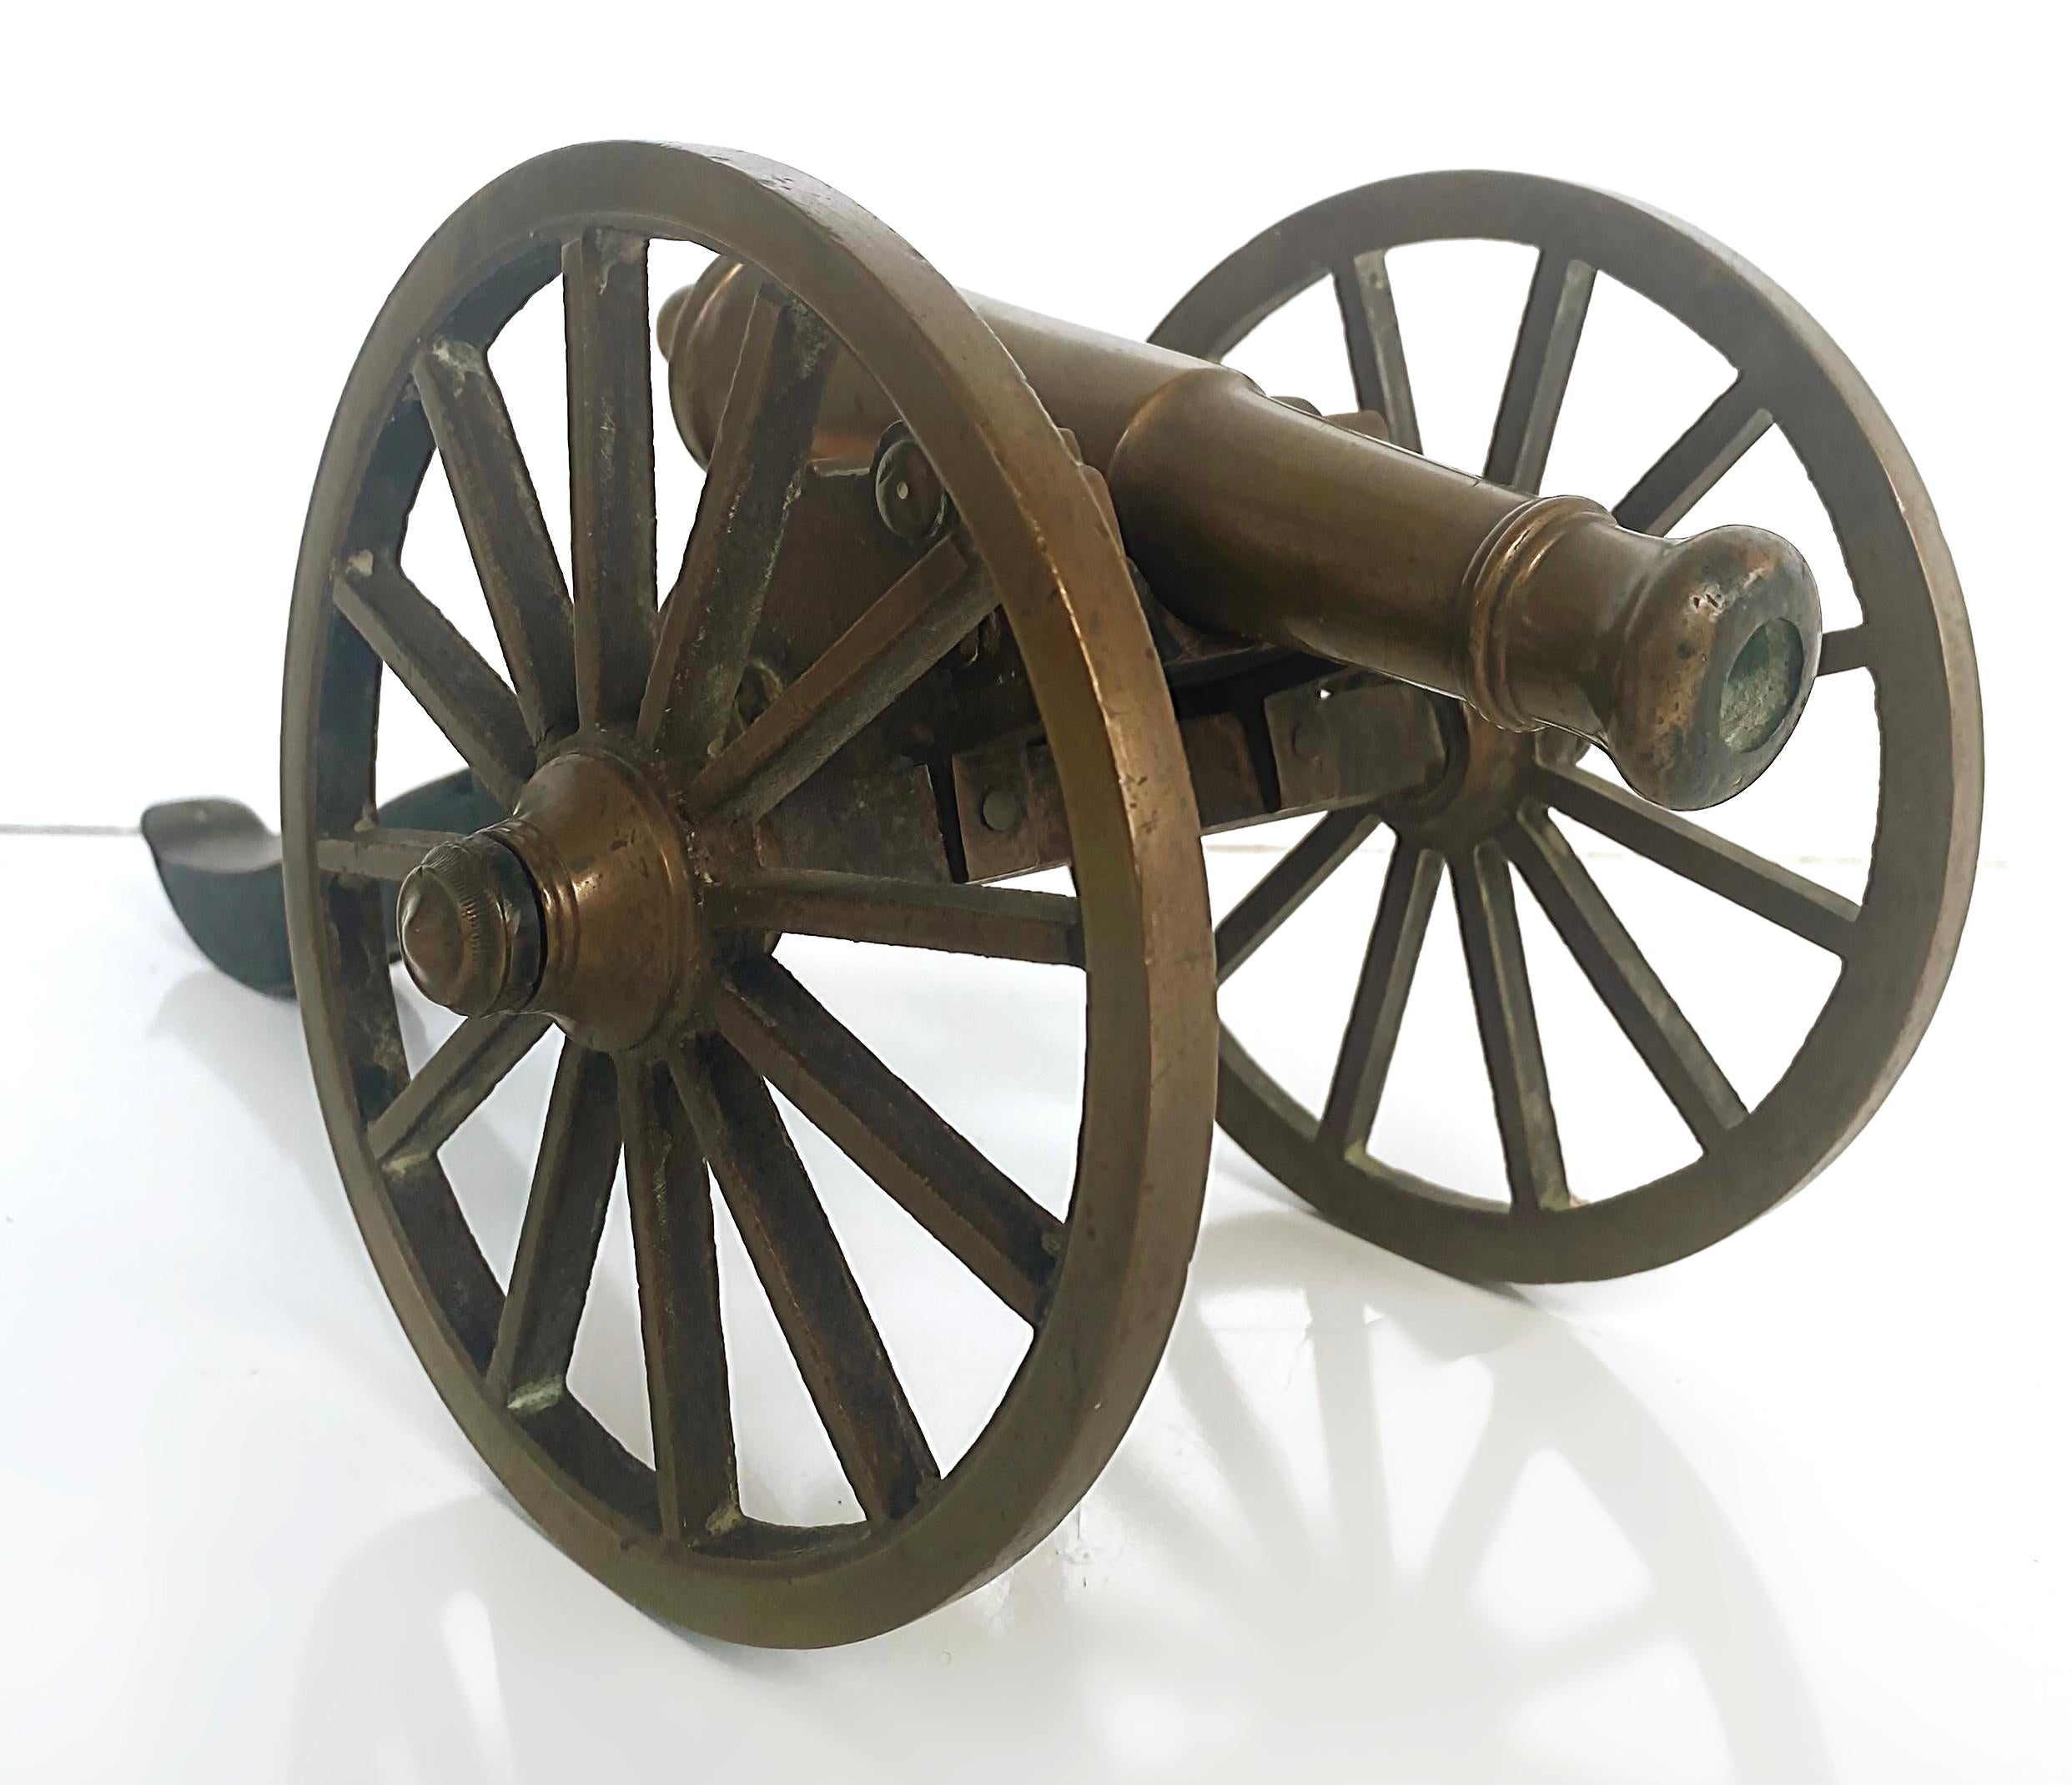 Early 20th Century Bronze and Wood Mounted Cannon Model 

Offered is an early miniature bronze cannon on a wood carriage with large bronze wheel. This will be displayed nicely on a desk or on shelves. 
